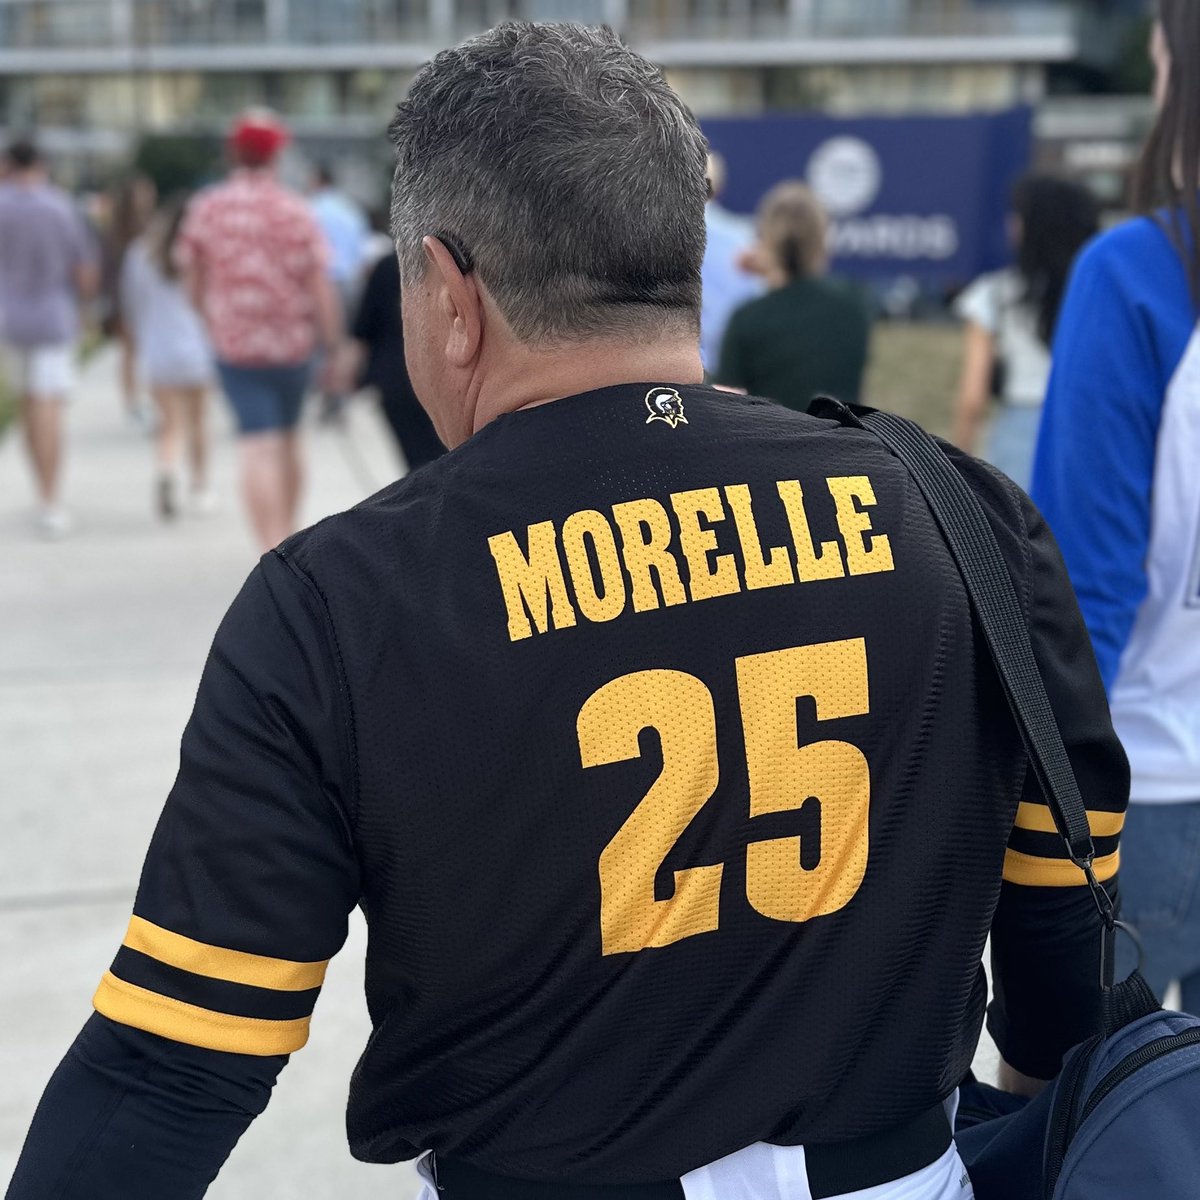 Joe Morelle on X: Tonight is the Congressional Baseball Game! My